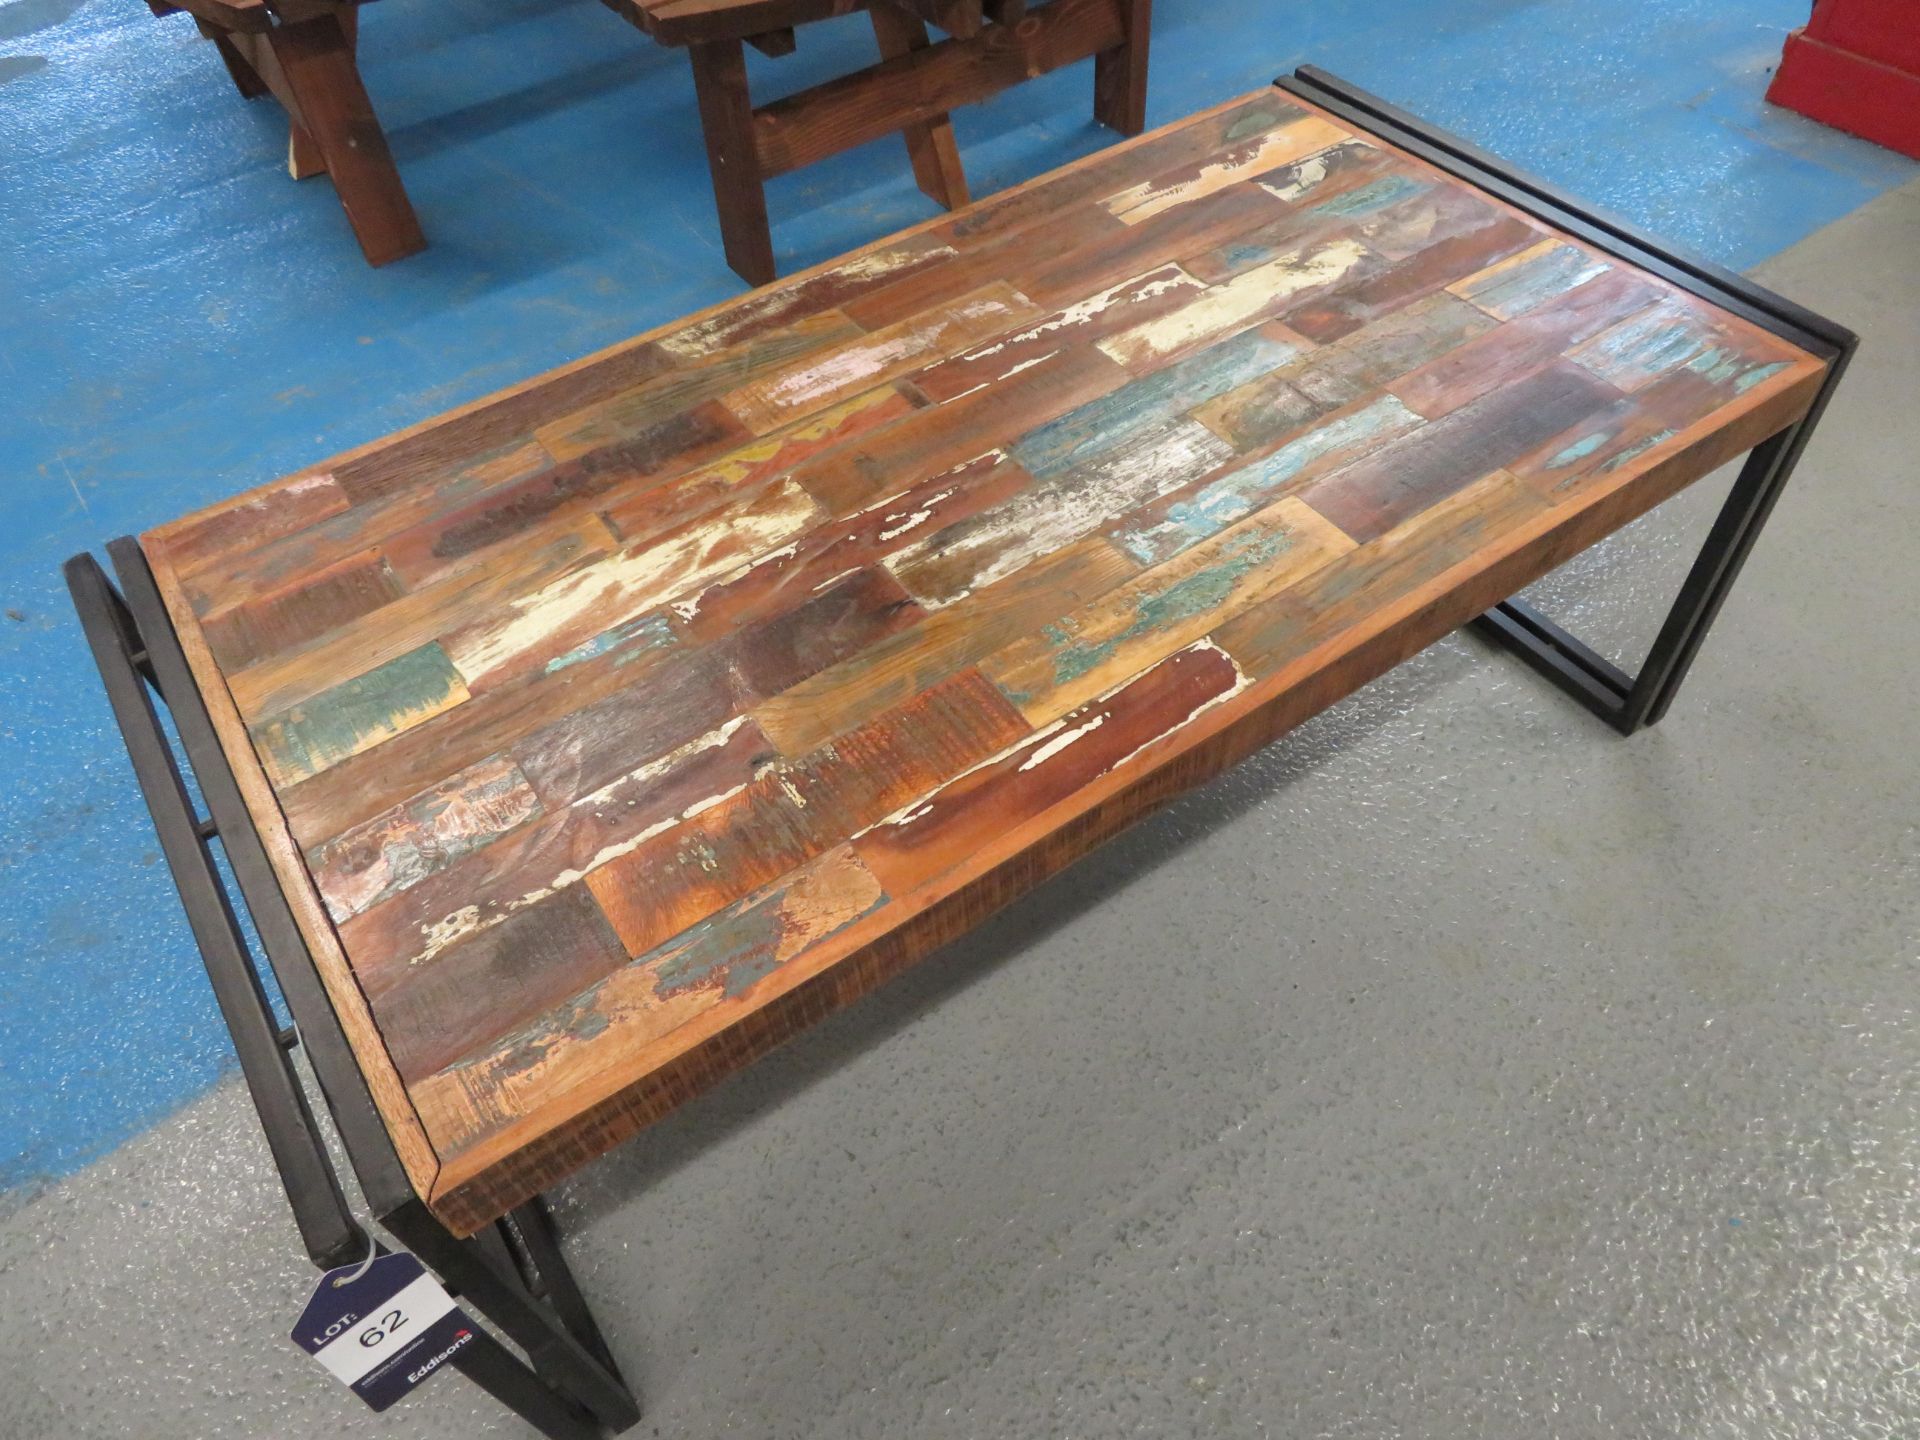 Urban Chic reclaimed wood effect coffee table with steel legs - Image 2 of 2